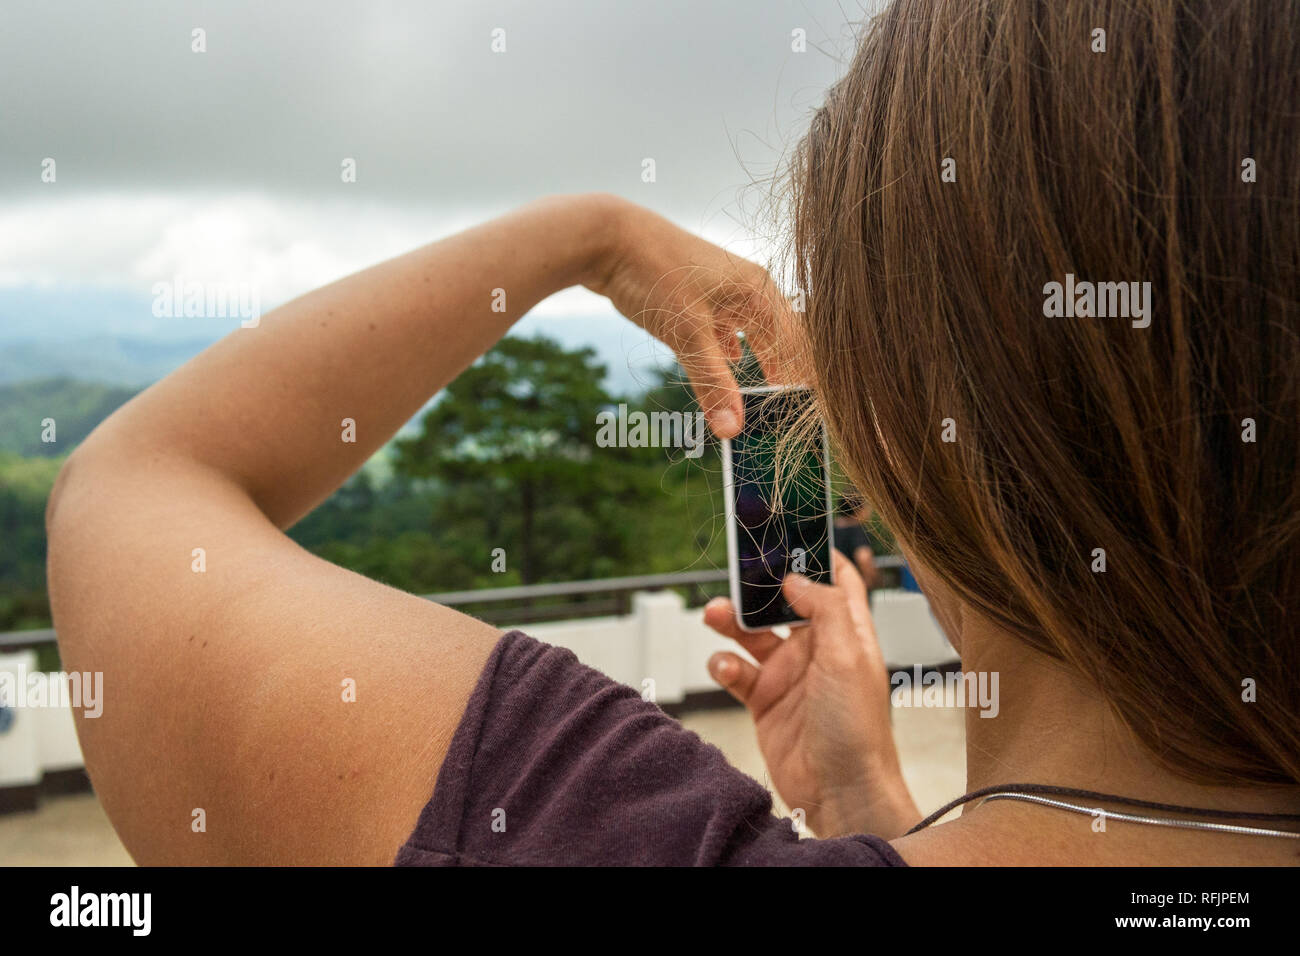 A young woman with brown hair use here smart phone to take a photo of the surrounding green landscape. Stock Photo